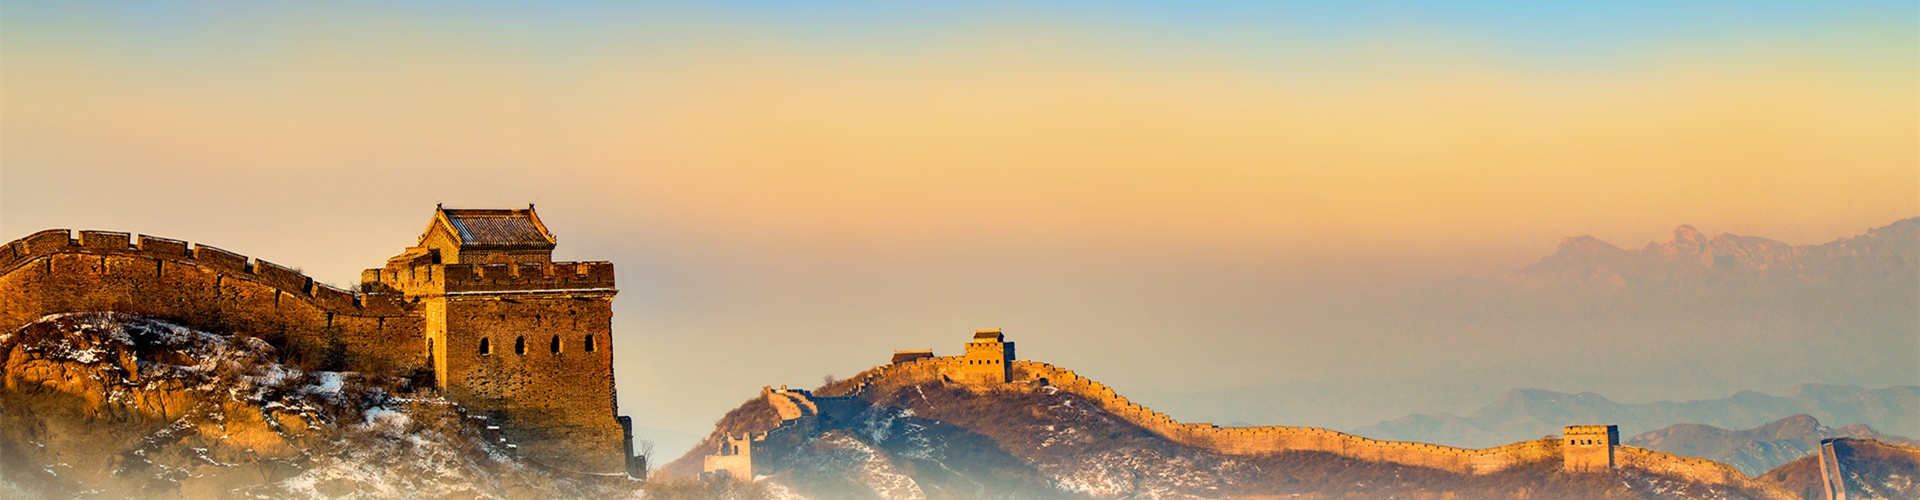 Chinese word: 長城, Great Wall in China